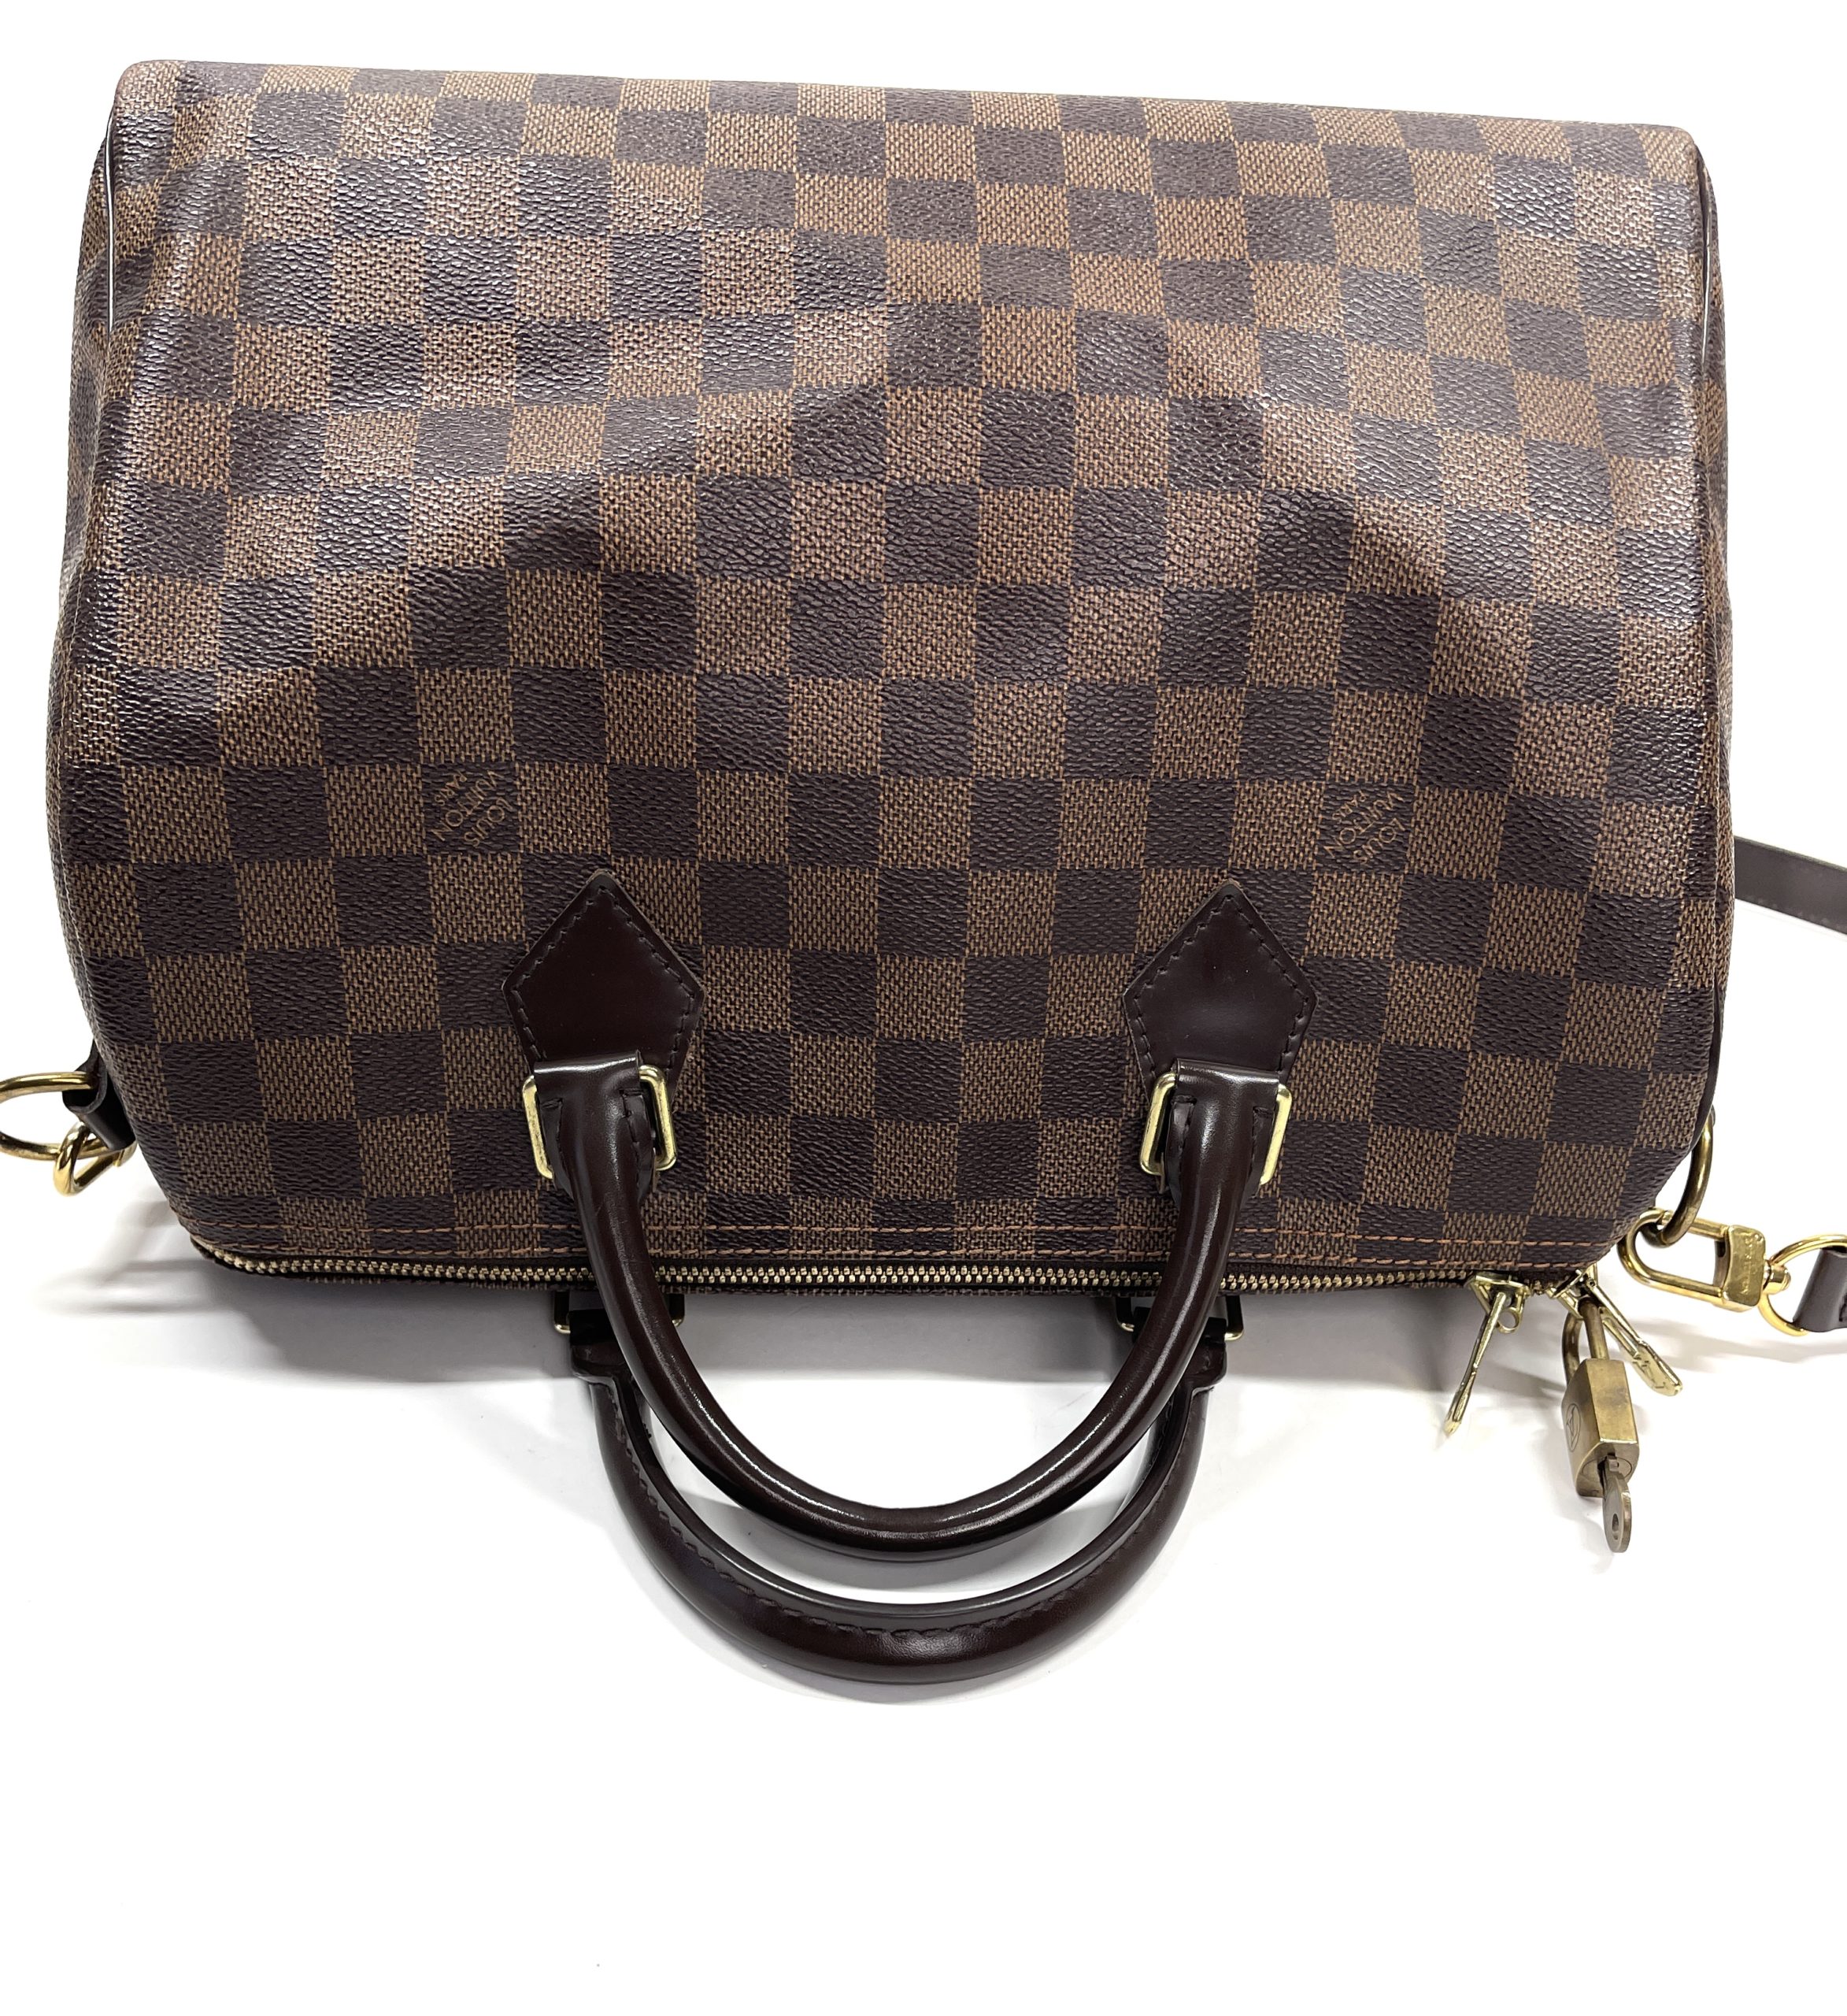 100% AUTHENTIC LIMITED EDITION LOUIS VUITTON SPEEDY 30 BANDOULIERE